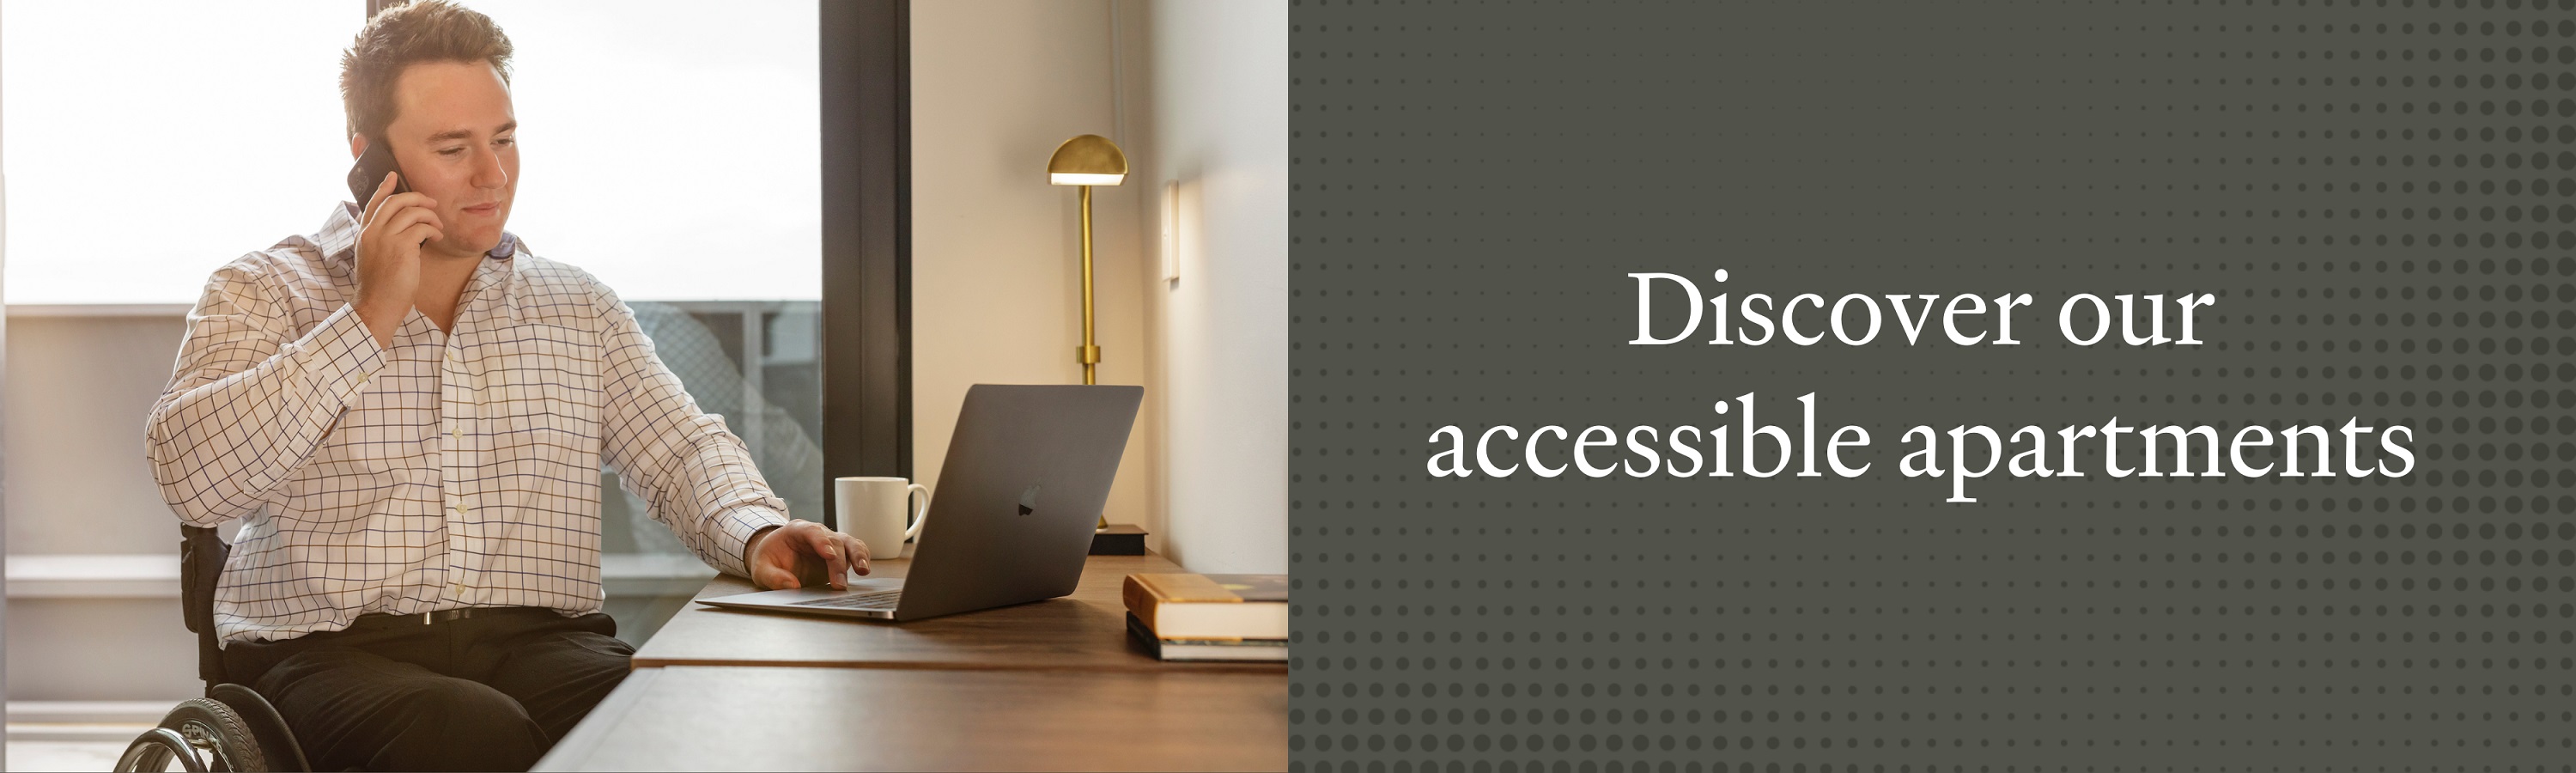 Accessibility web banner 7